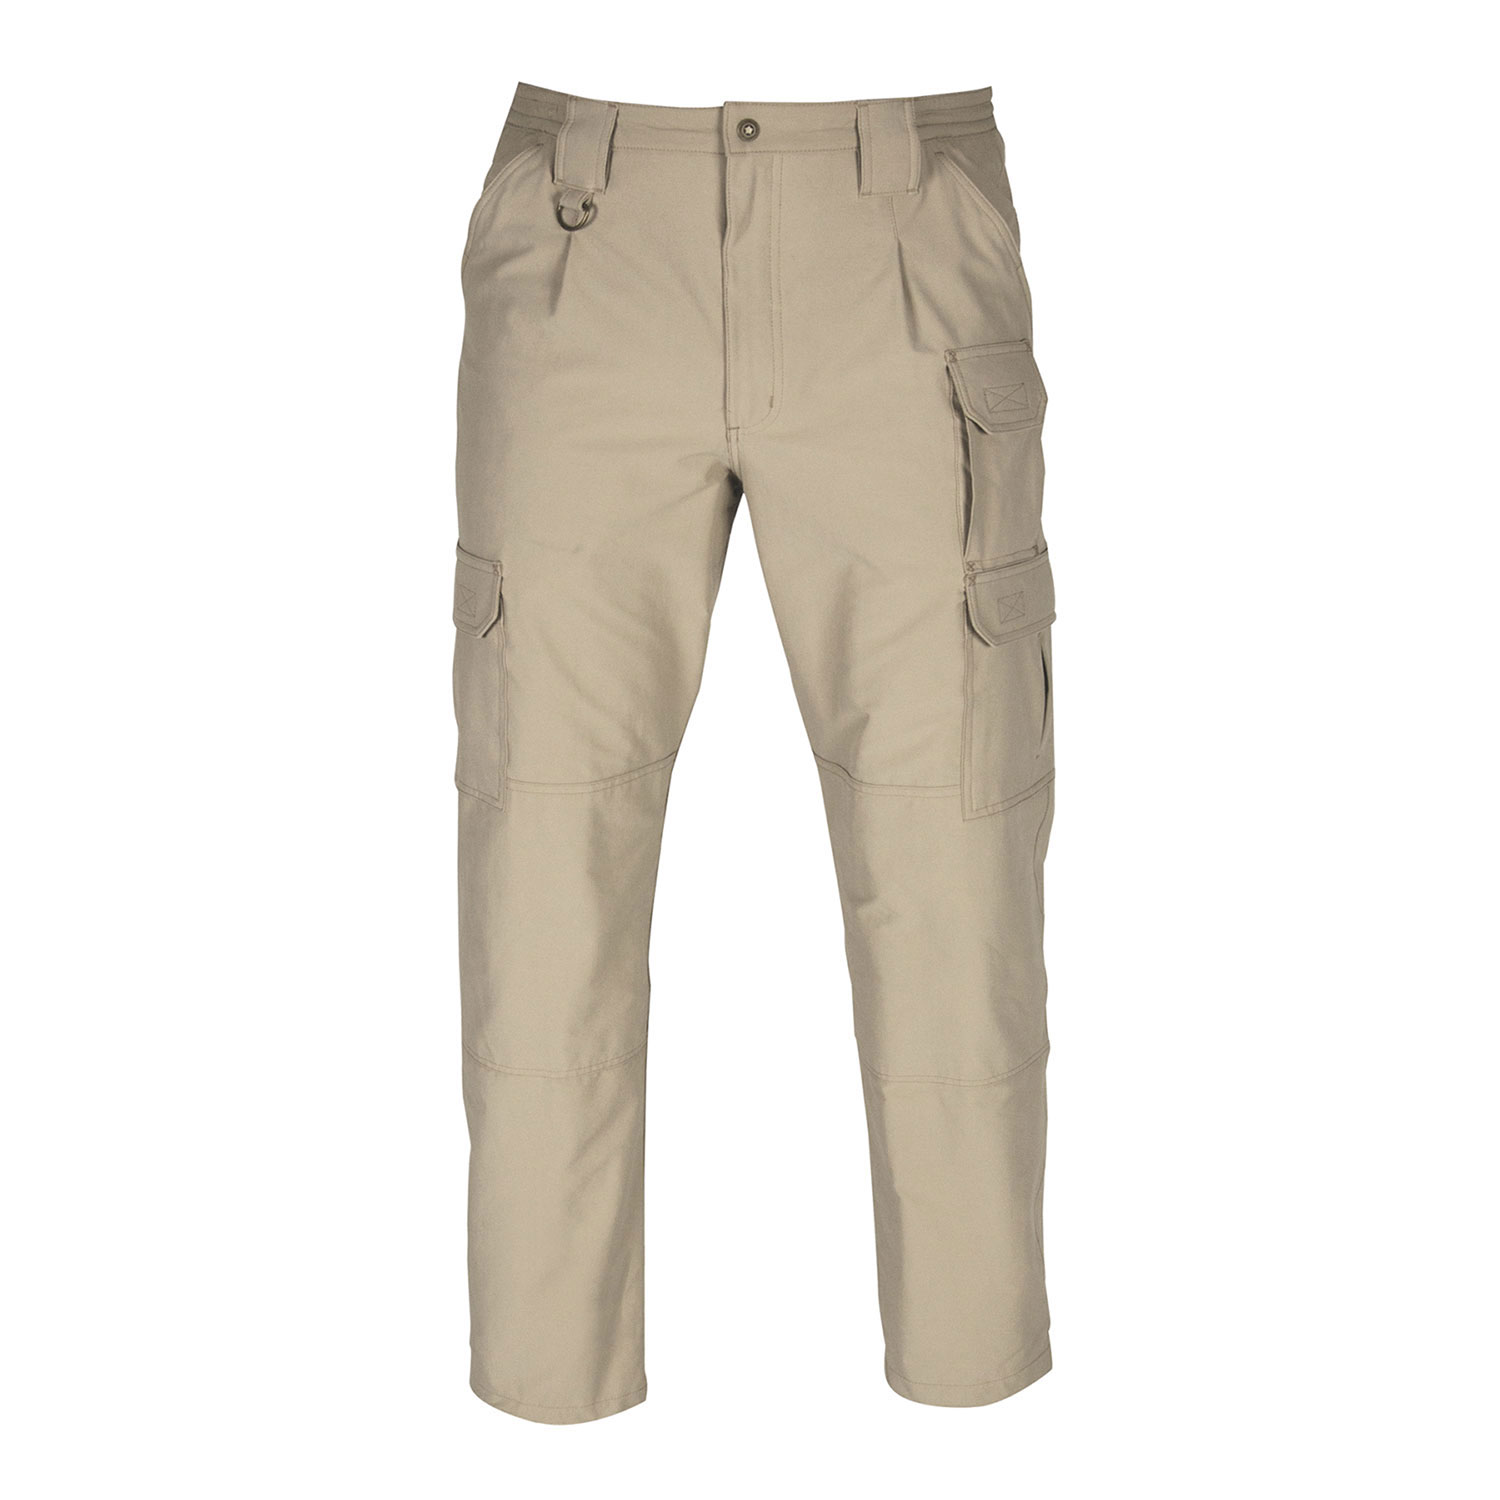 Propper Women's Stretch Tactical Pant